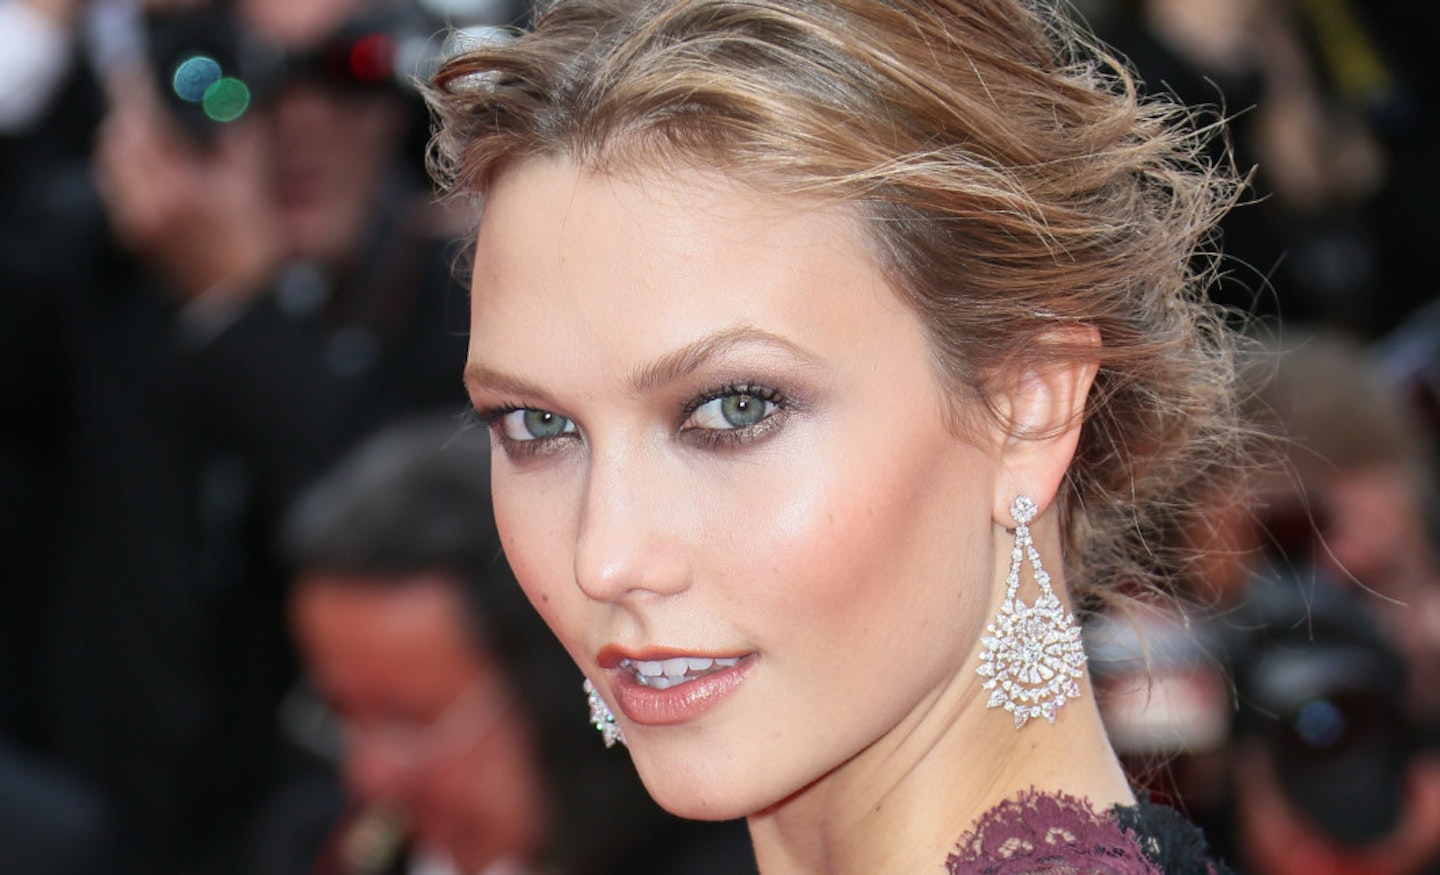 Karlie Kloss On BFF Cara Delevingne And Being A Victoria's Secret Angel:  EXCLUSIVE